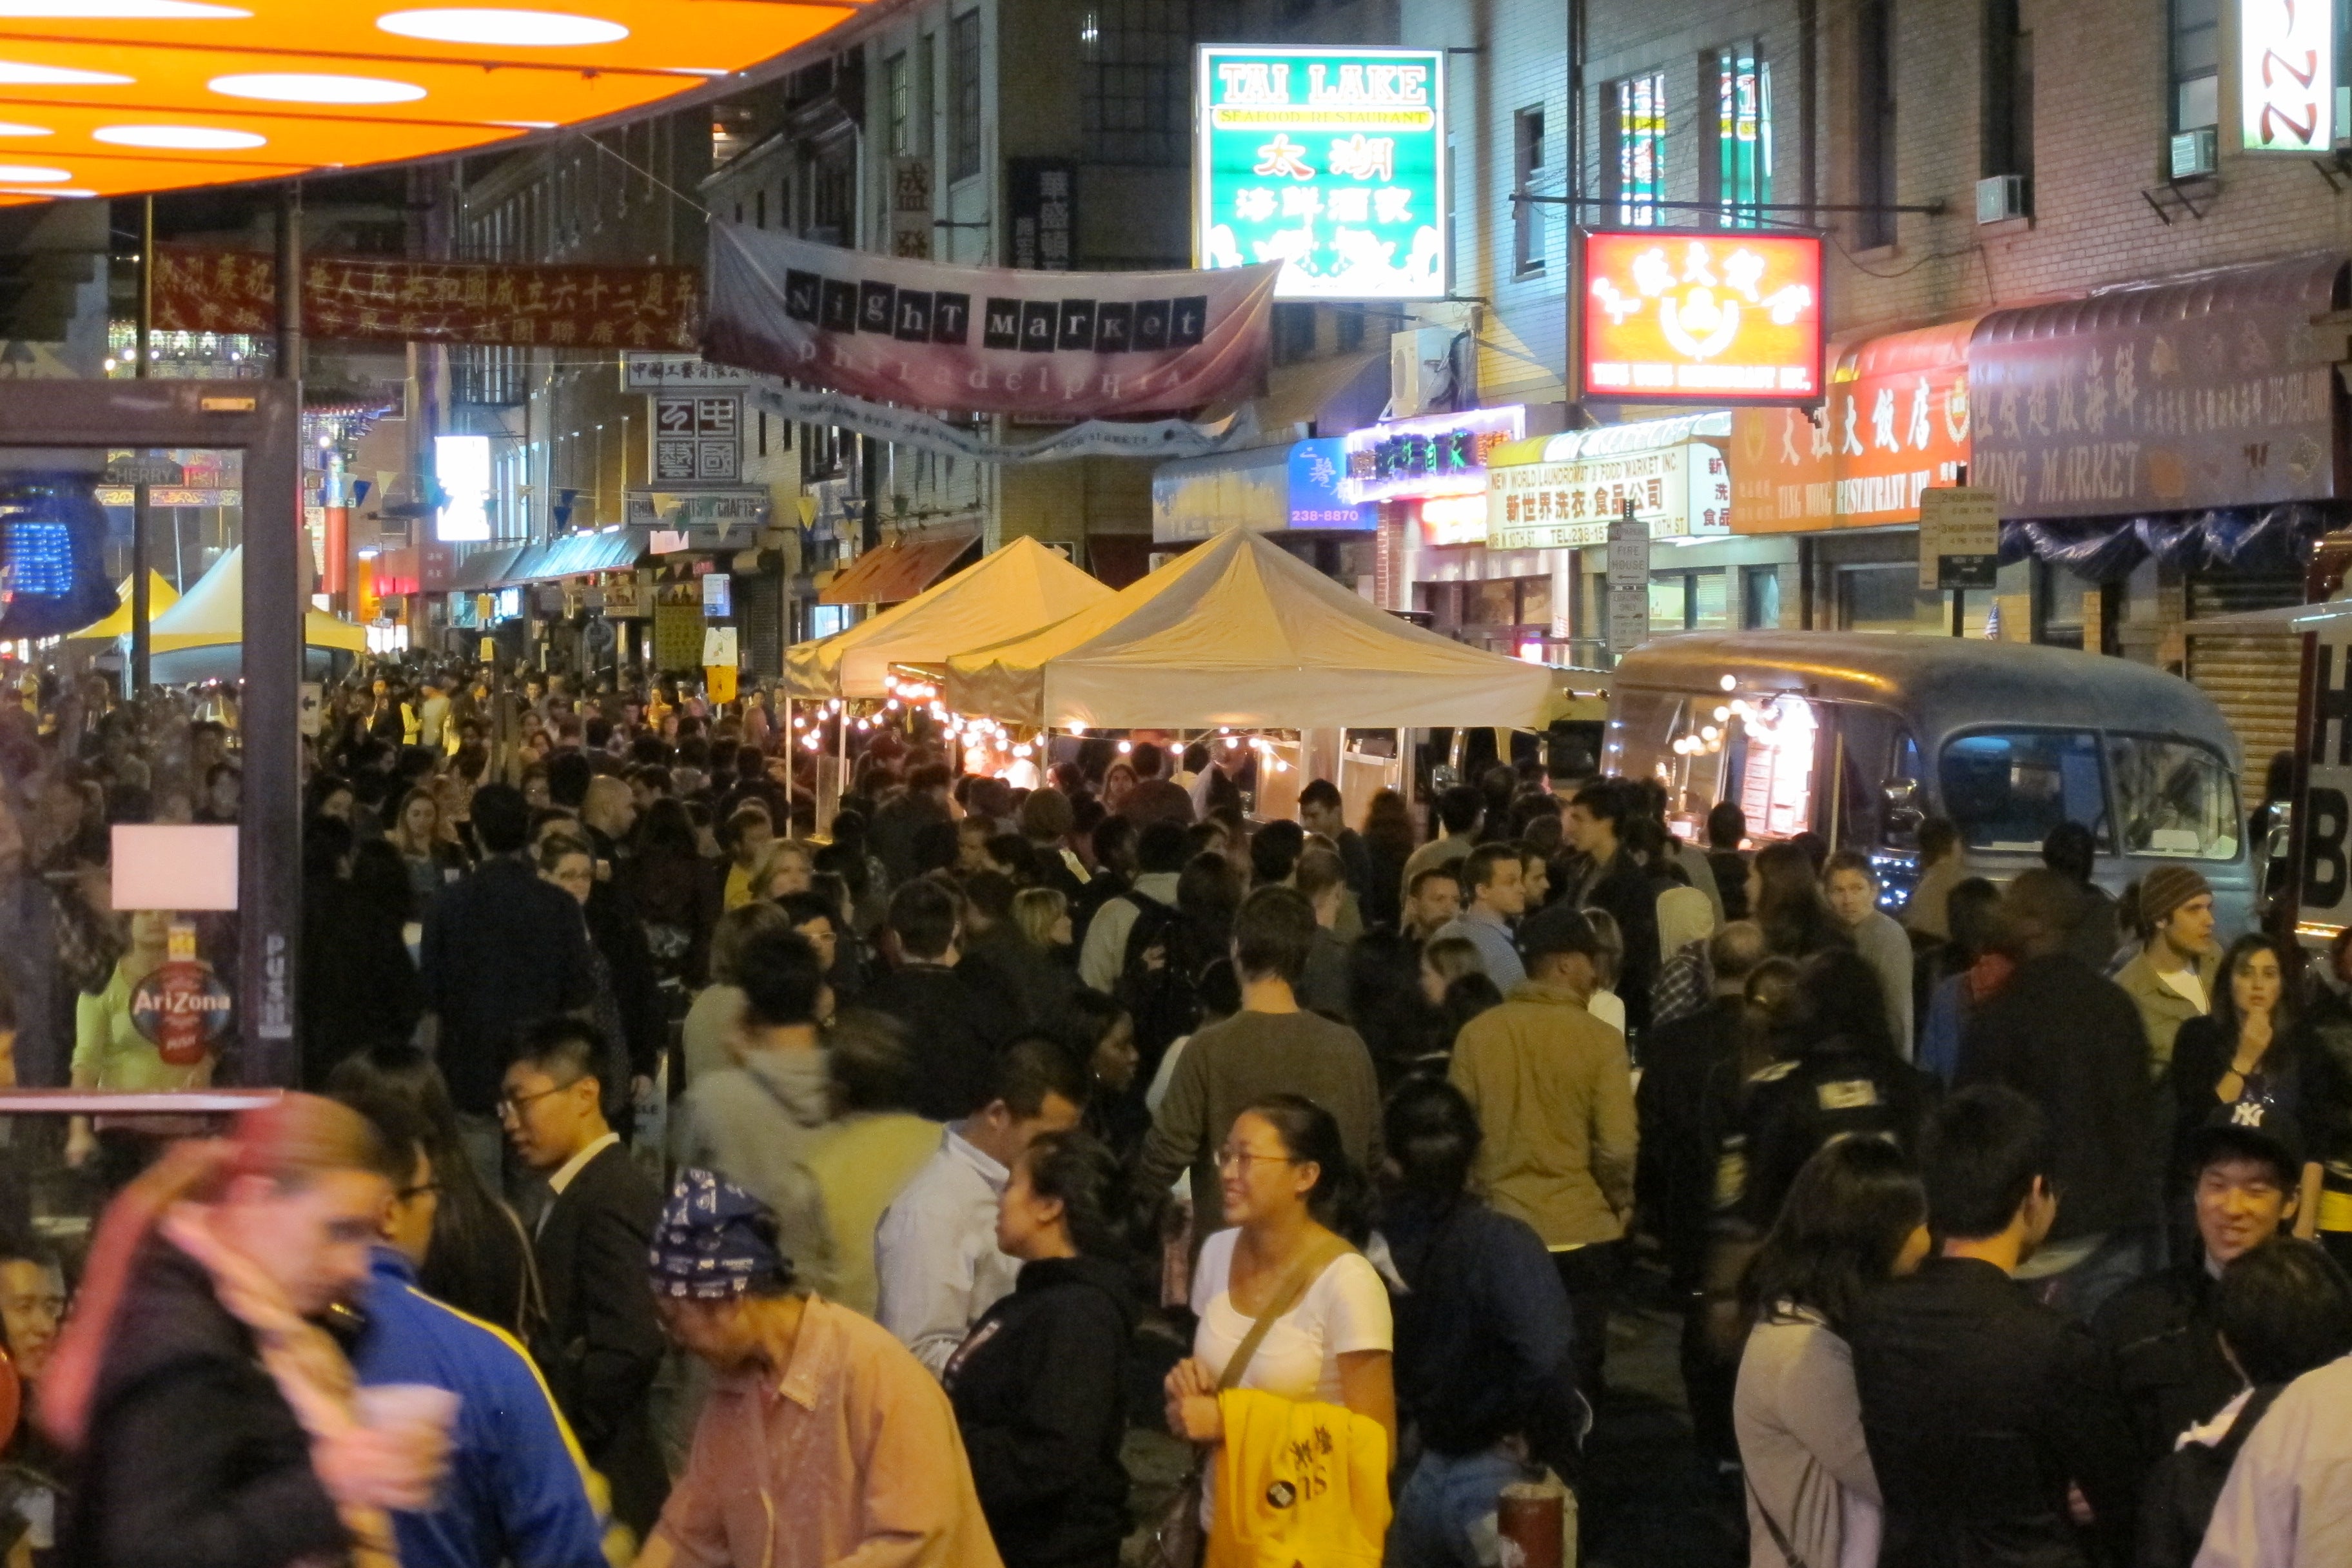 Night Market packed the streets of Chinatown last fall and will return for the season in May.